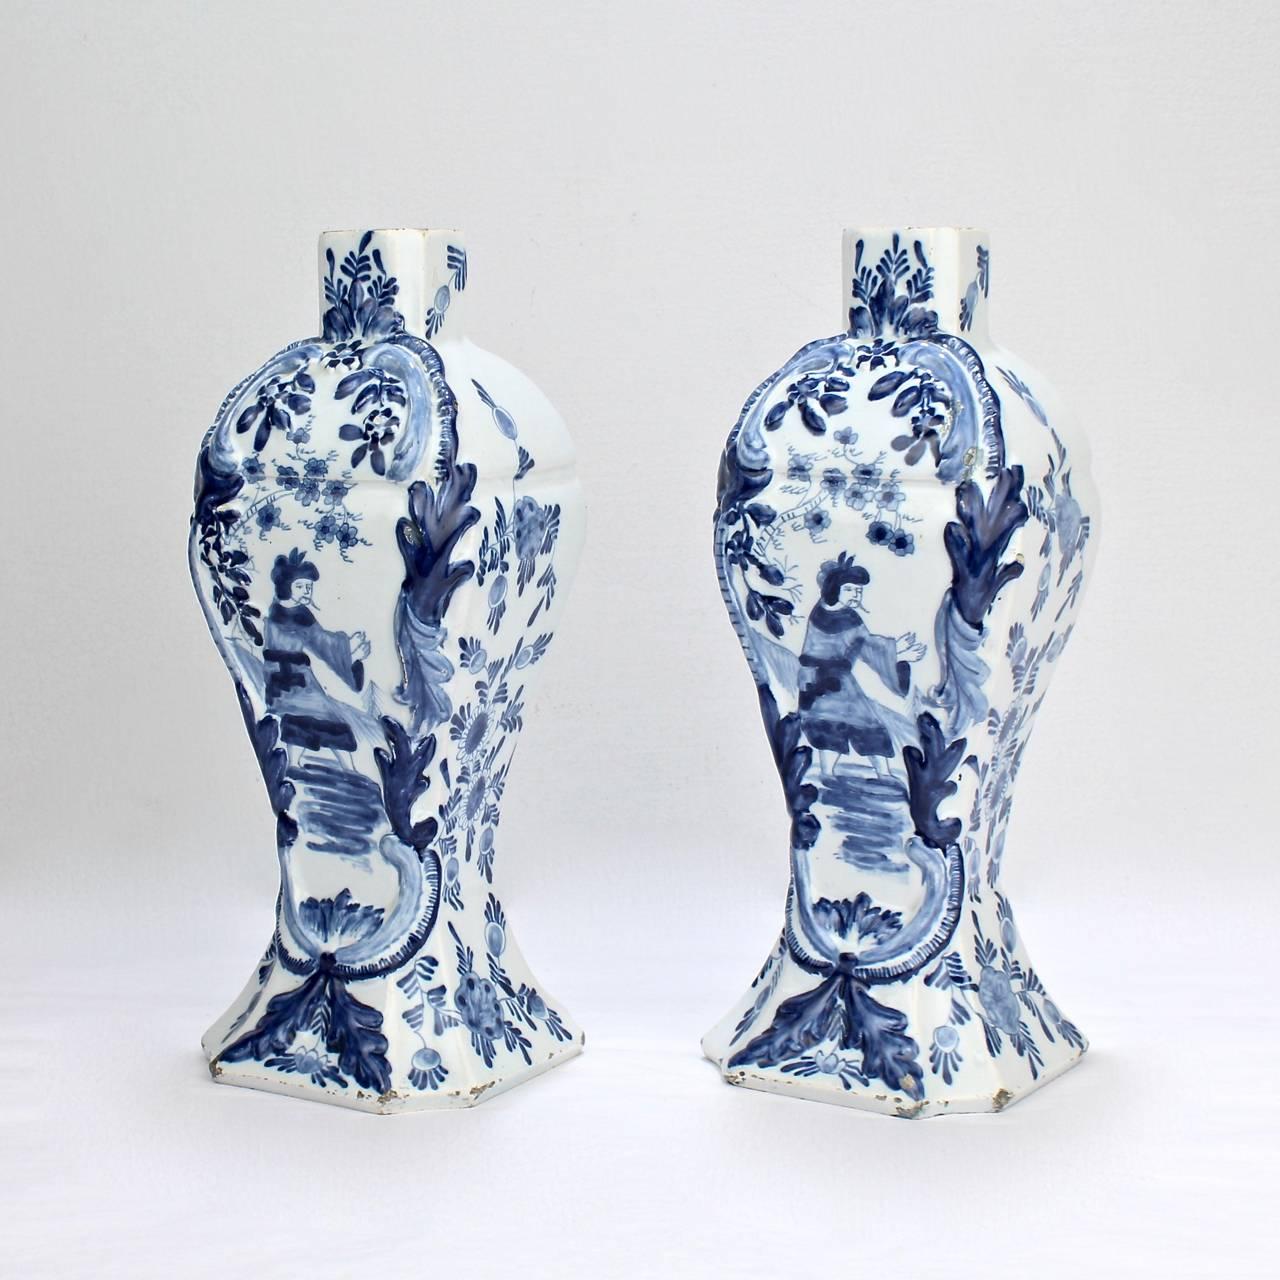 A fine pair of antique Dutch Delft garniture vases. 

Each is of an elegant, narrow form and depicts a Chinoiserie scene in the typical Dutch blue and white palette.

Dating to the 18th or 19th century.

Bases both marked with a blue